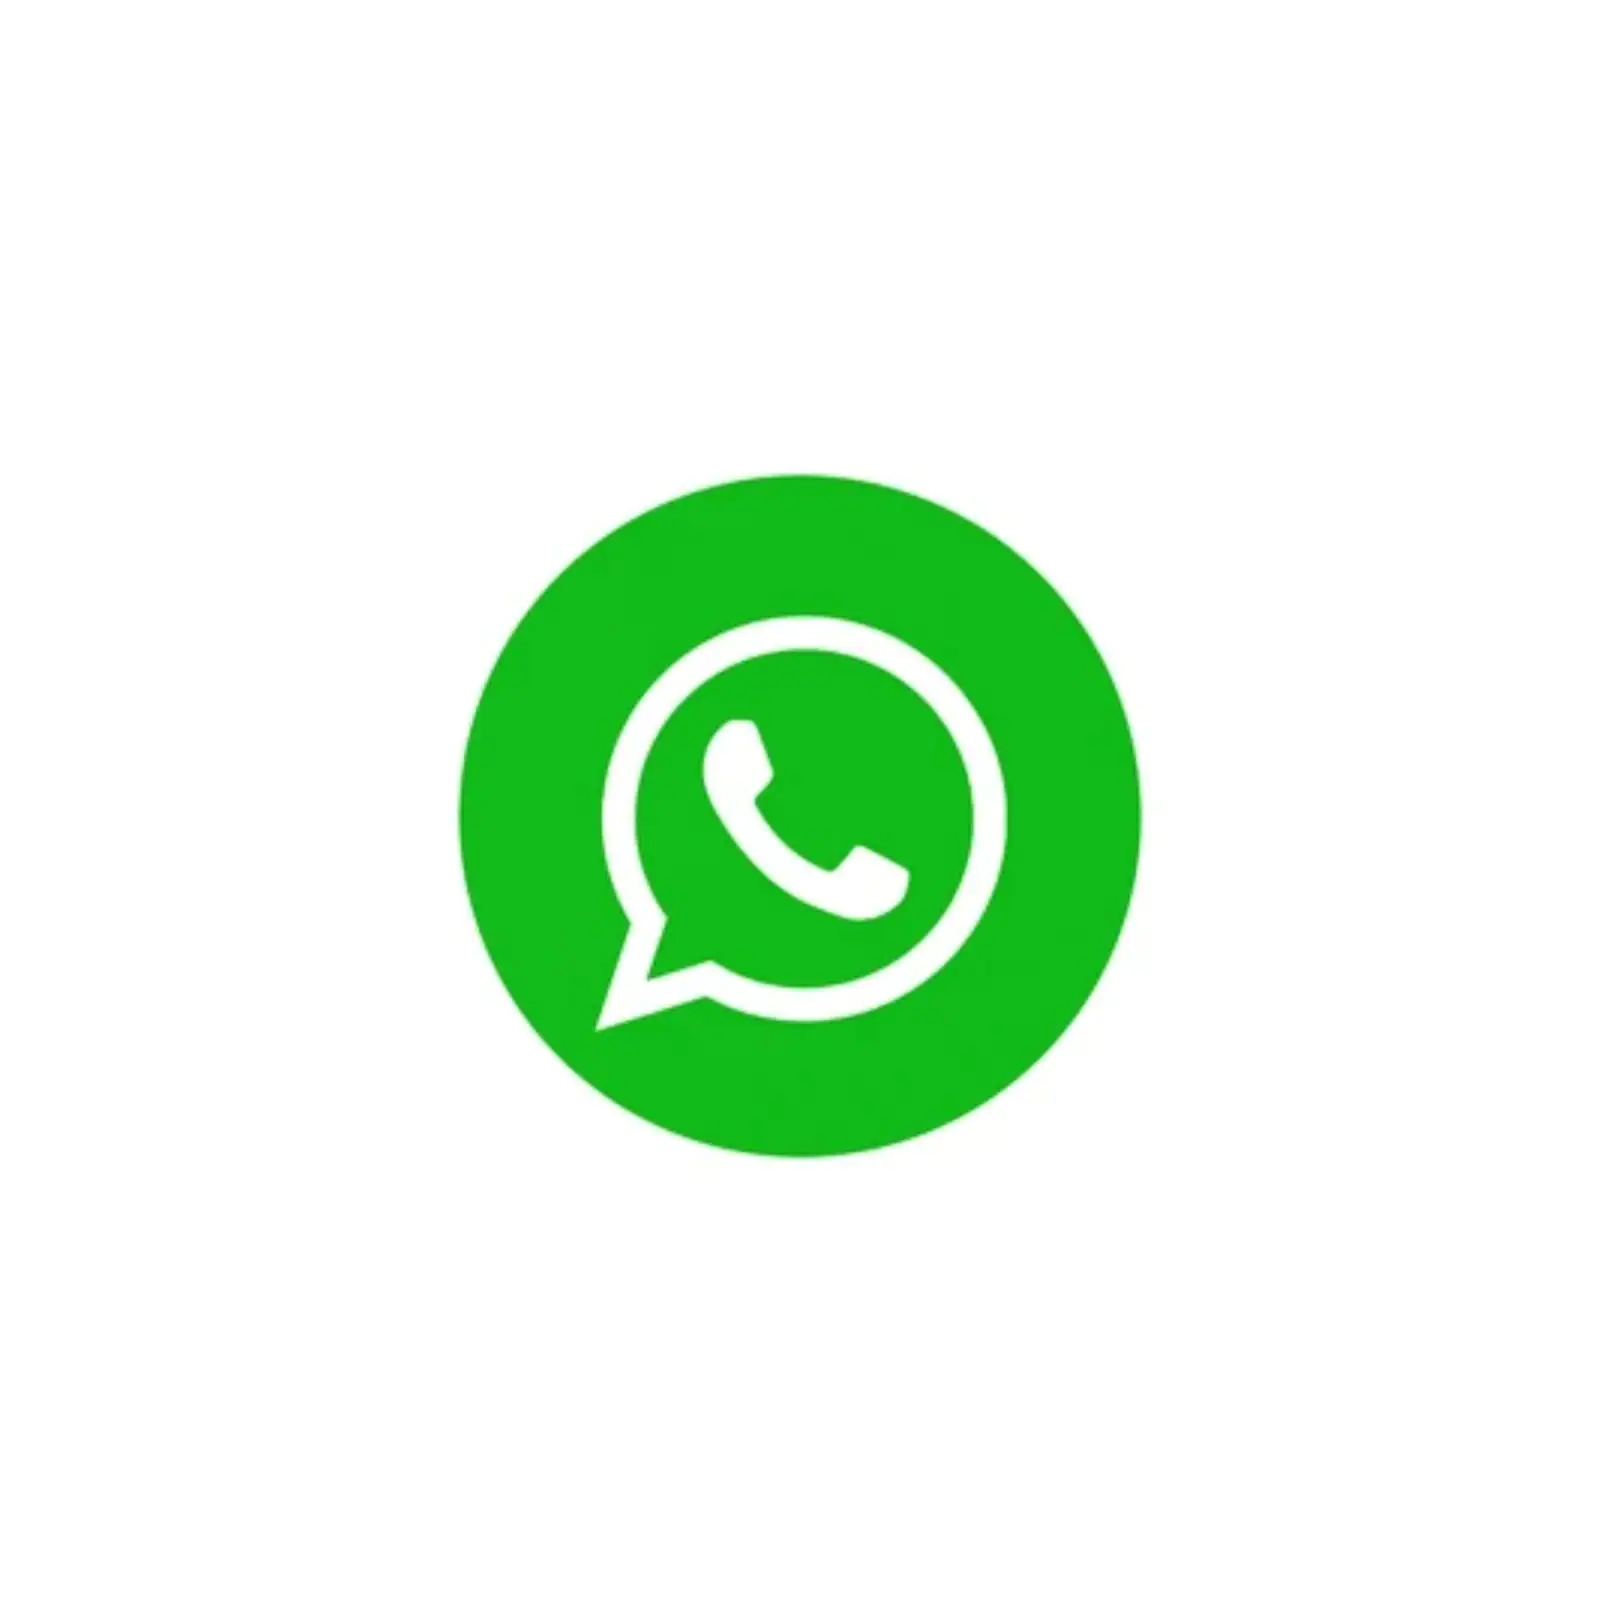 How to Share Live Location on WhatsApp